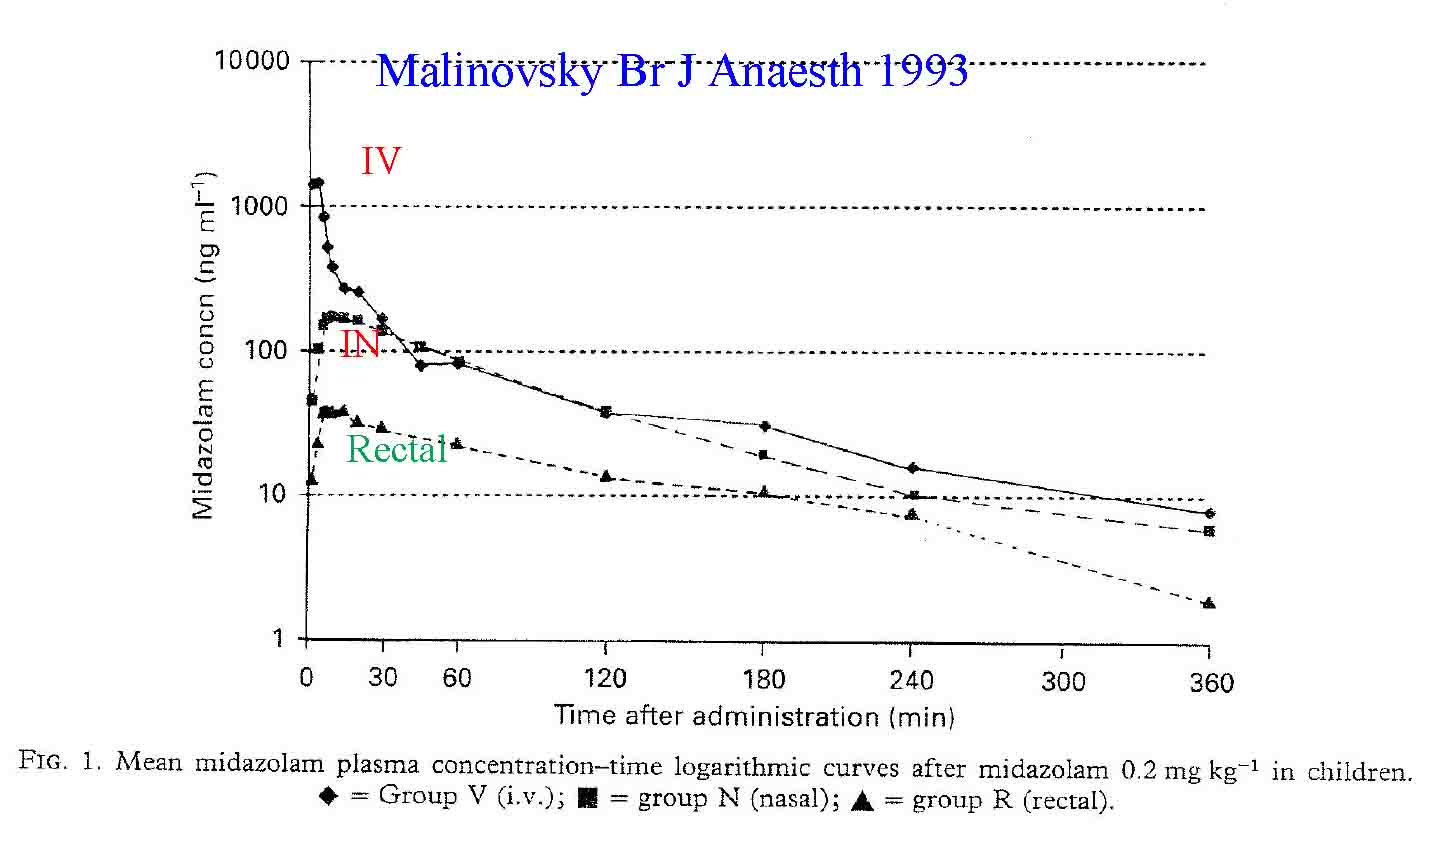 Malinovsky 1993 data demonstrating peak levels of midazoalm when given via the intravenous, intranasal and rectal routes